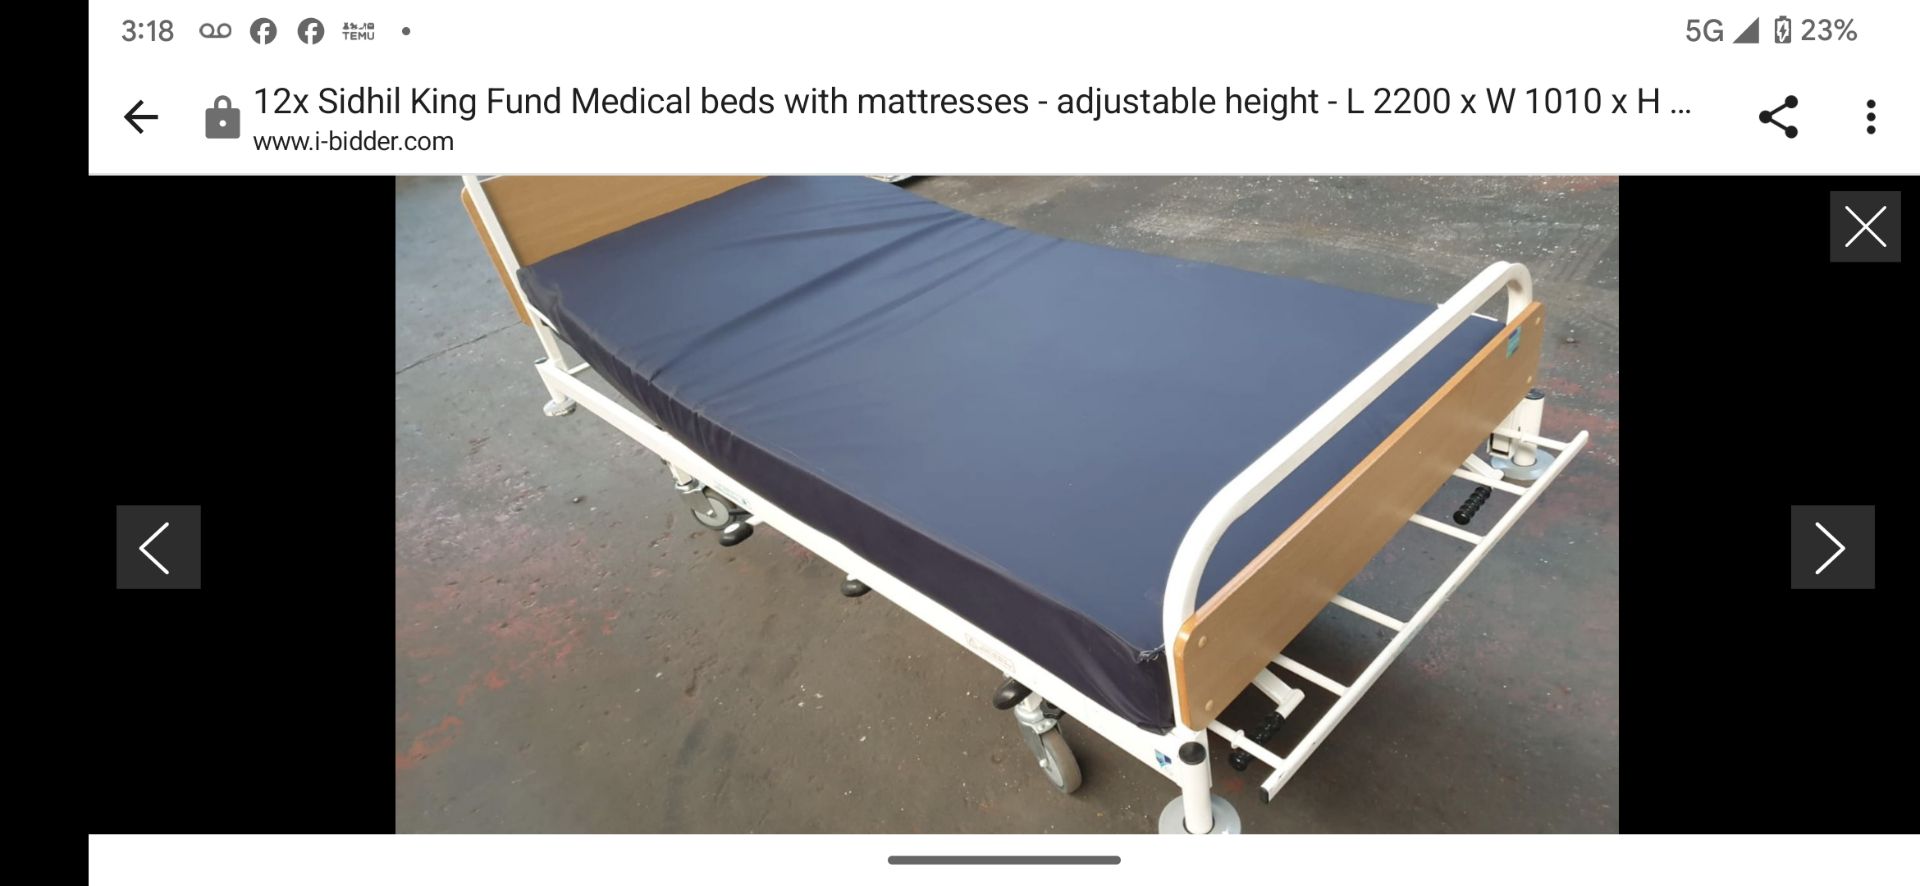 5 x Sidhil Kings Fund Hydraulic Hospital Beds With Mattresses - Image 3 of 6